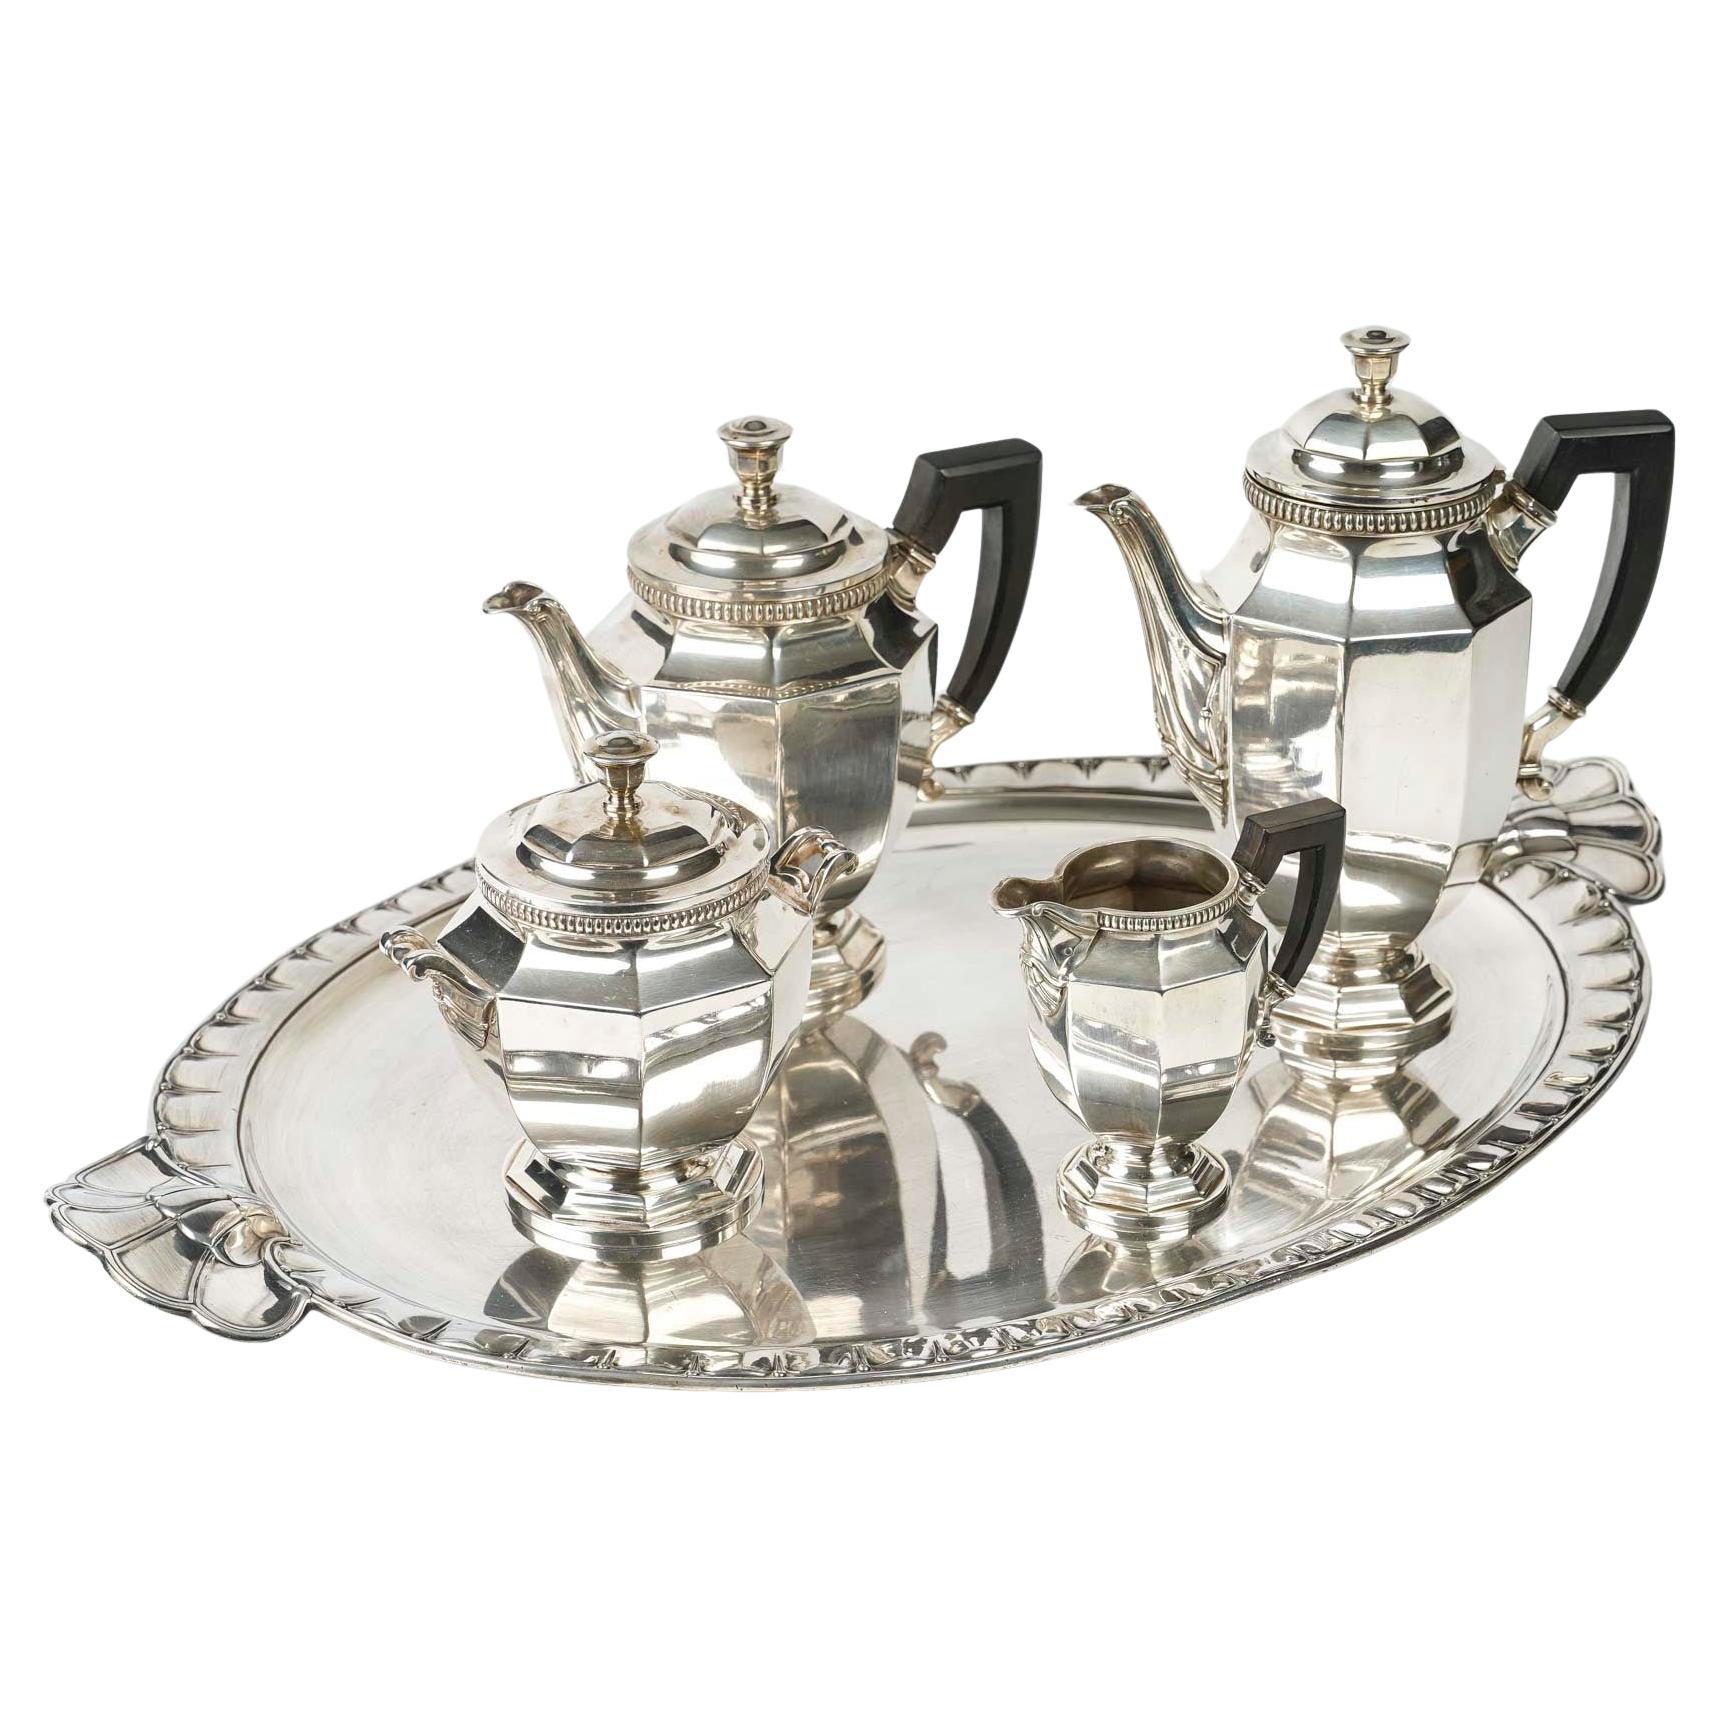 Gallia Silver Plated Tea or Coffee Service. For Sale